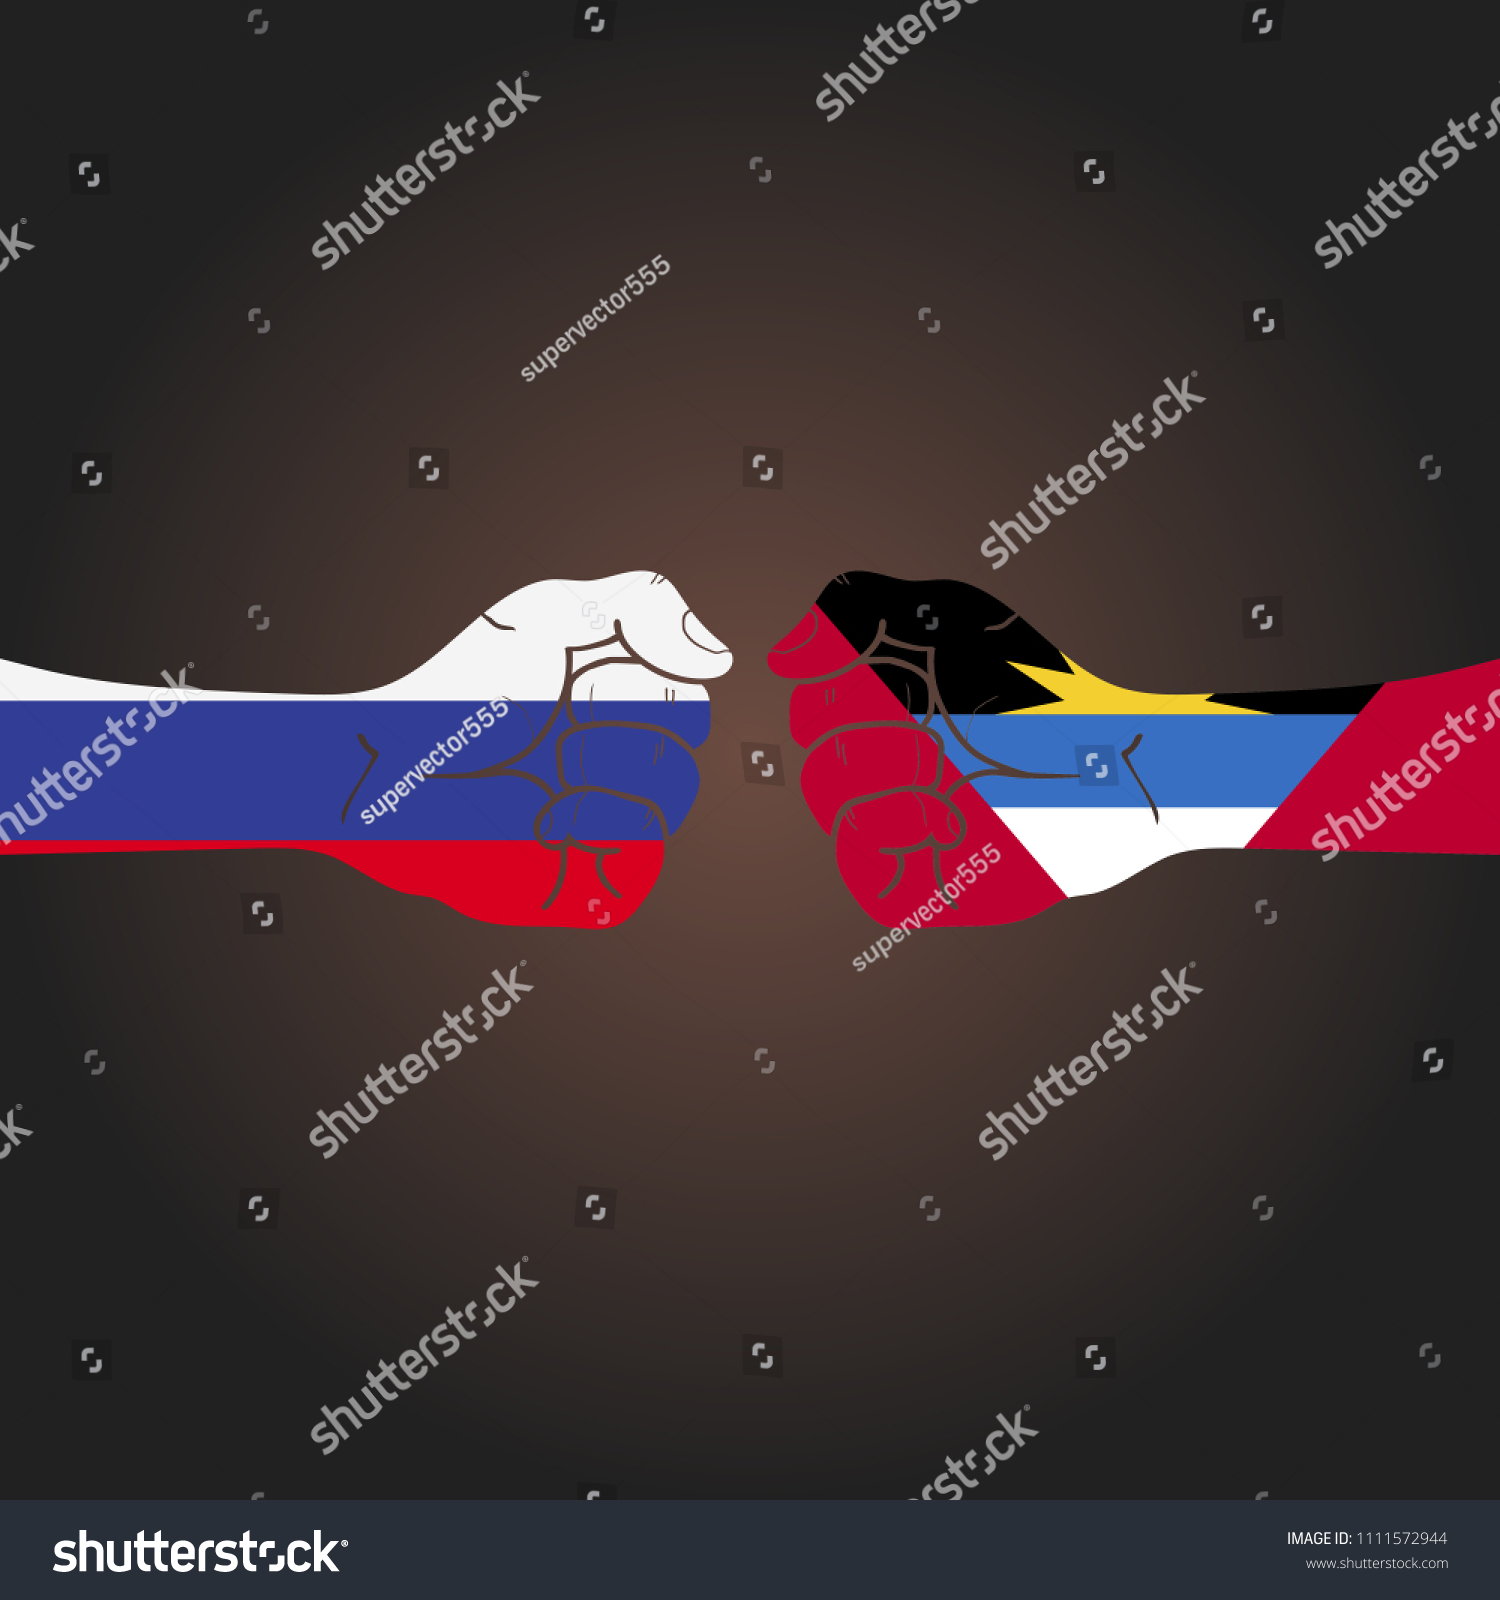 Conflict between countries: Russia vs Antigua and Barbuda #1111572944